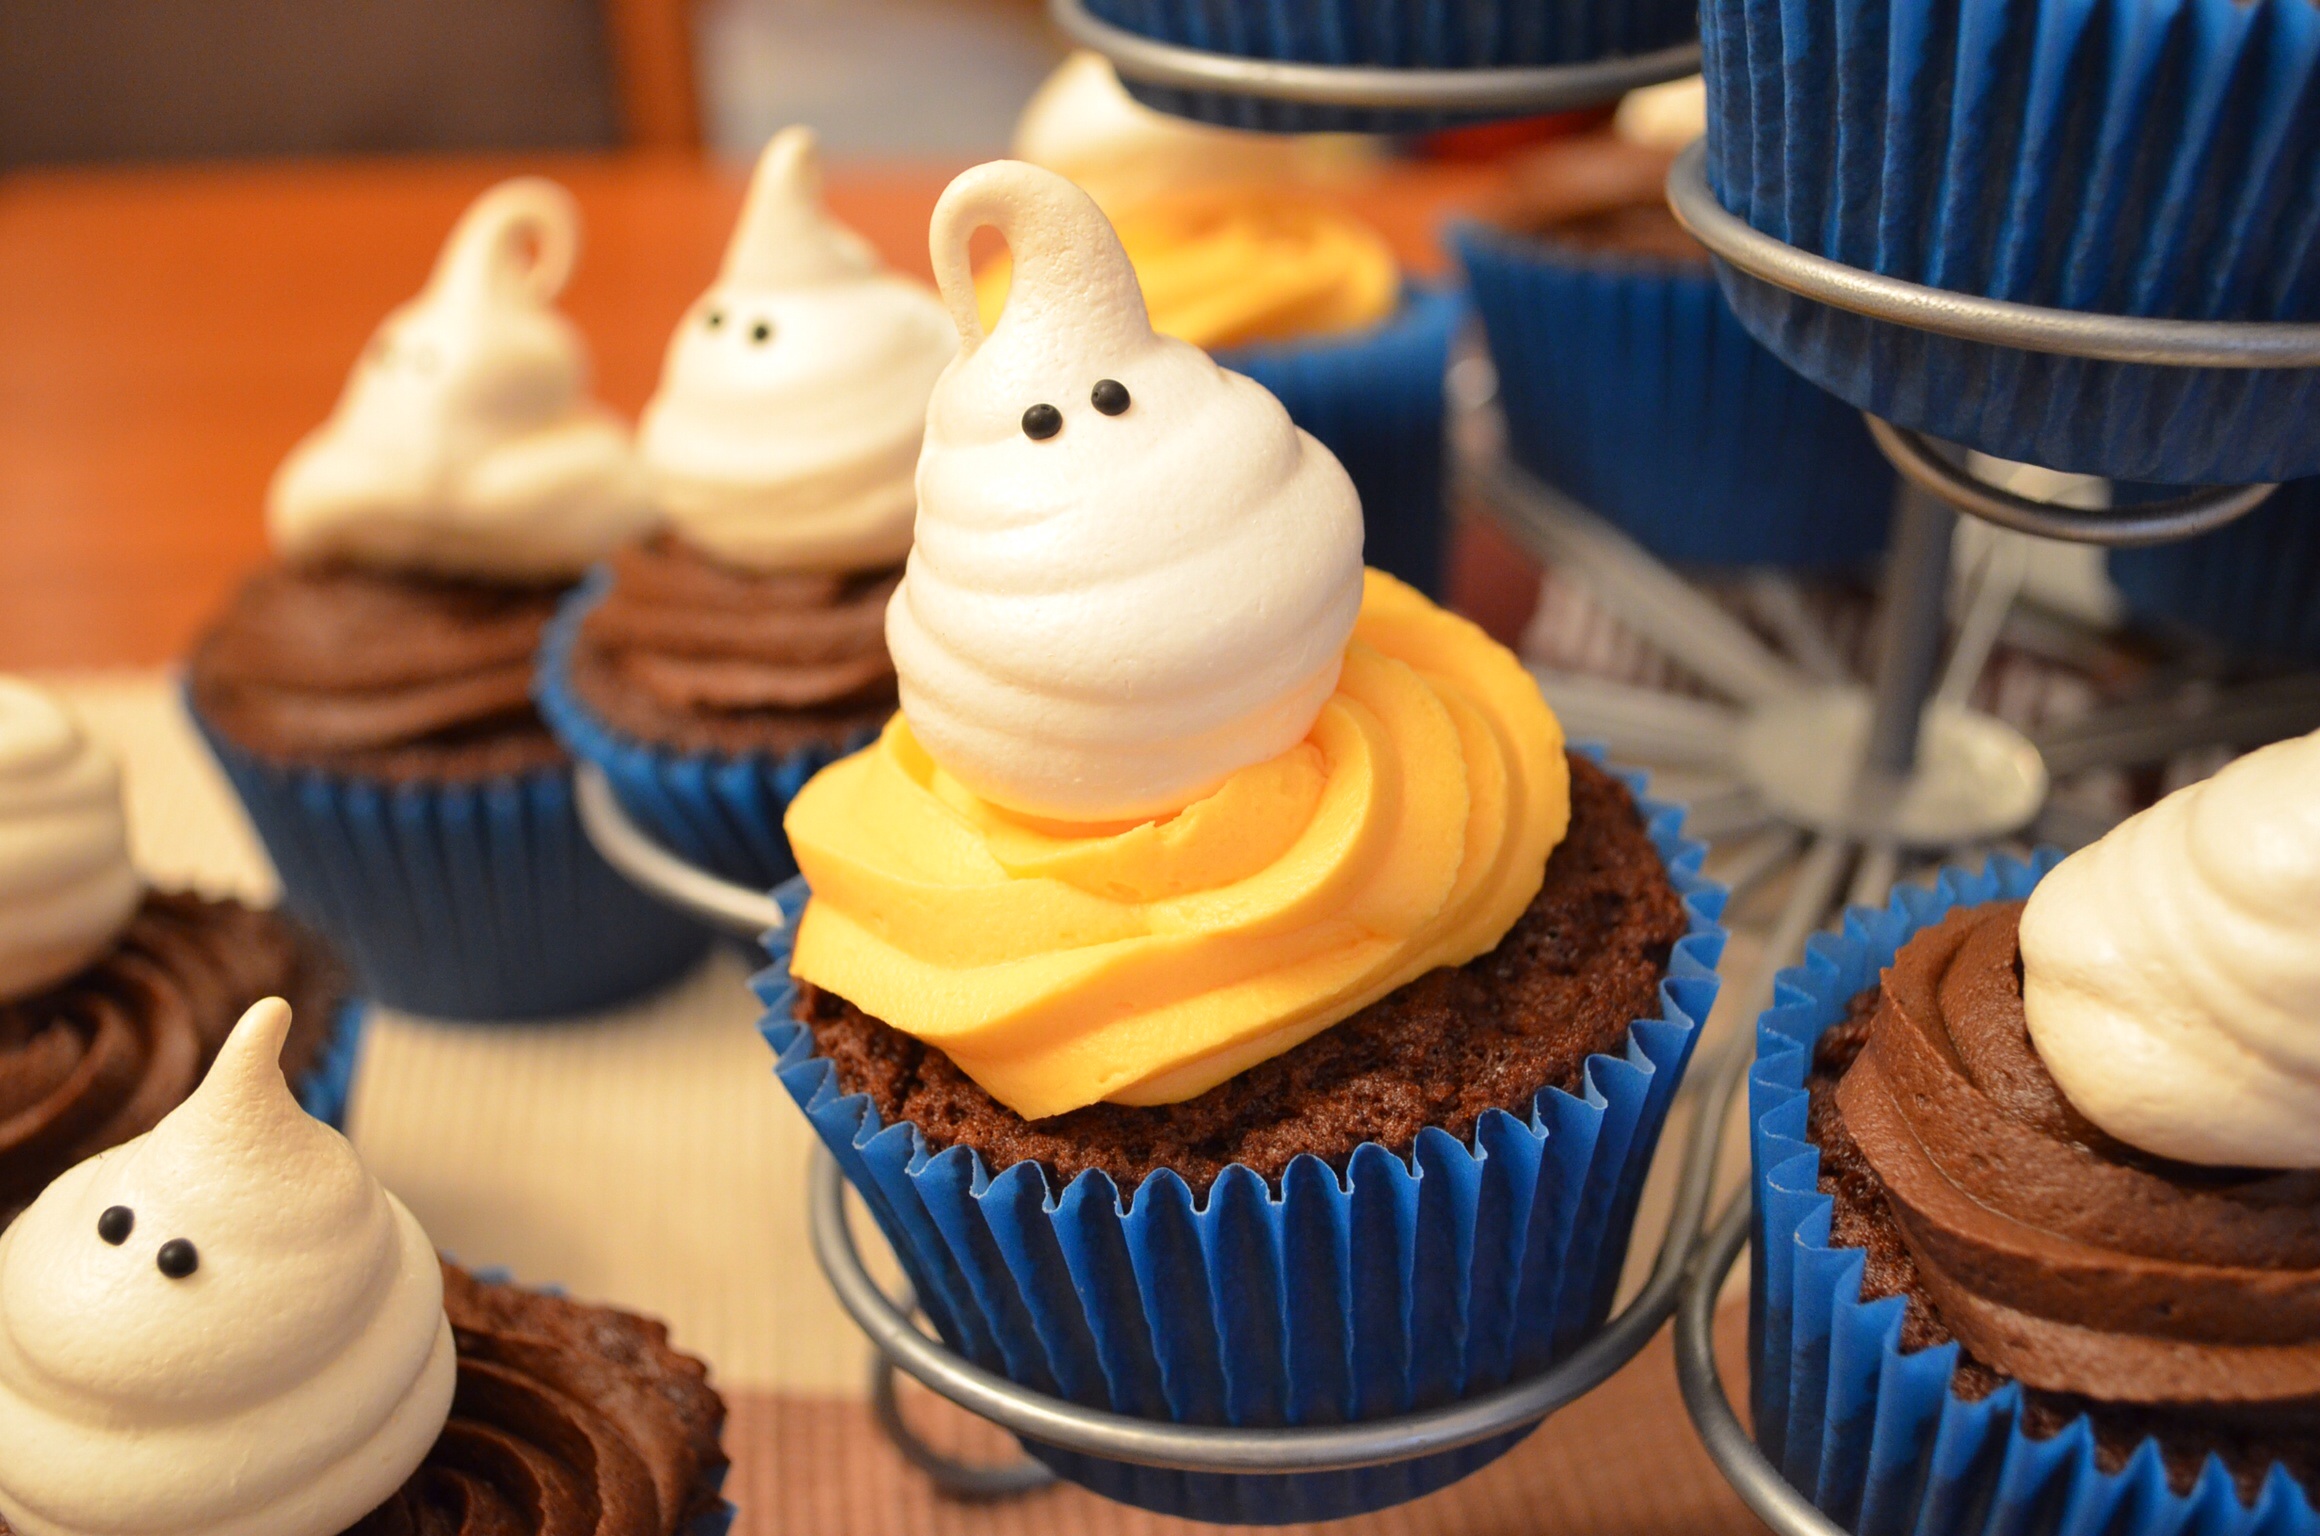 Ghostly Halloween Cupcakes The Great British Bake Off The Great